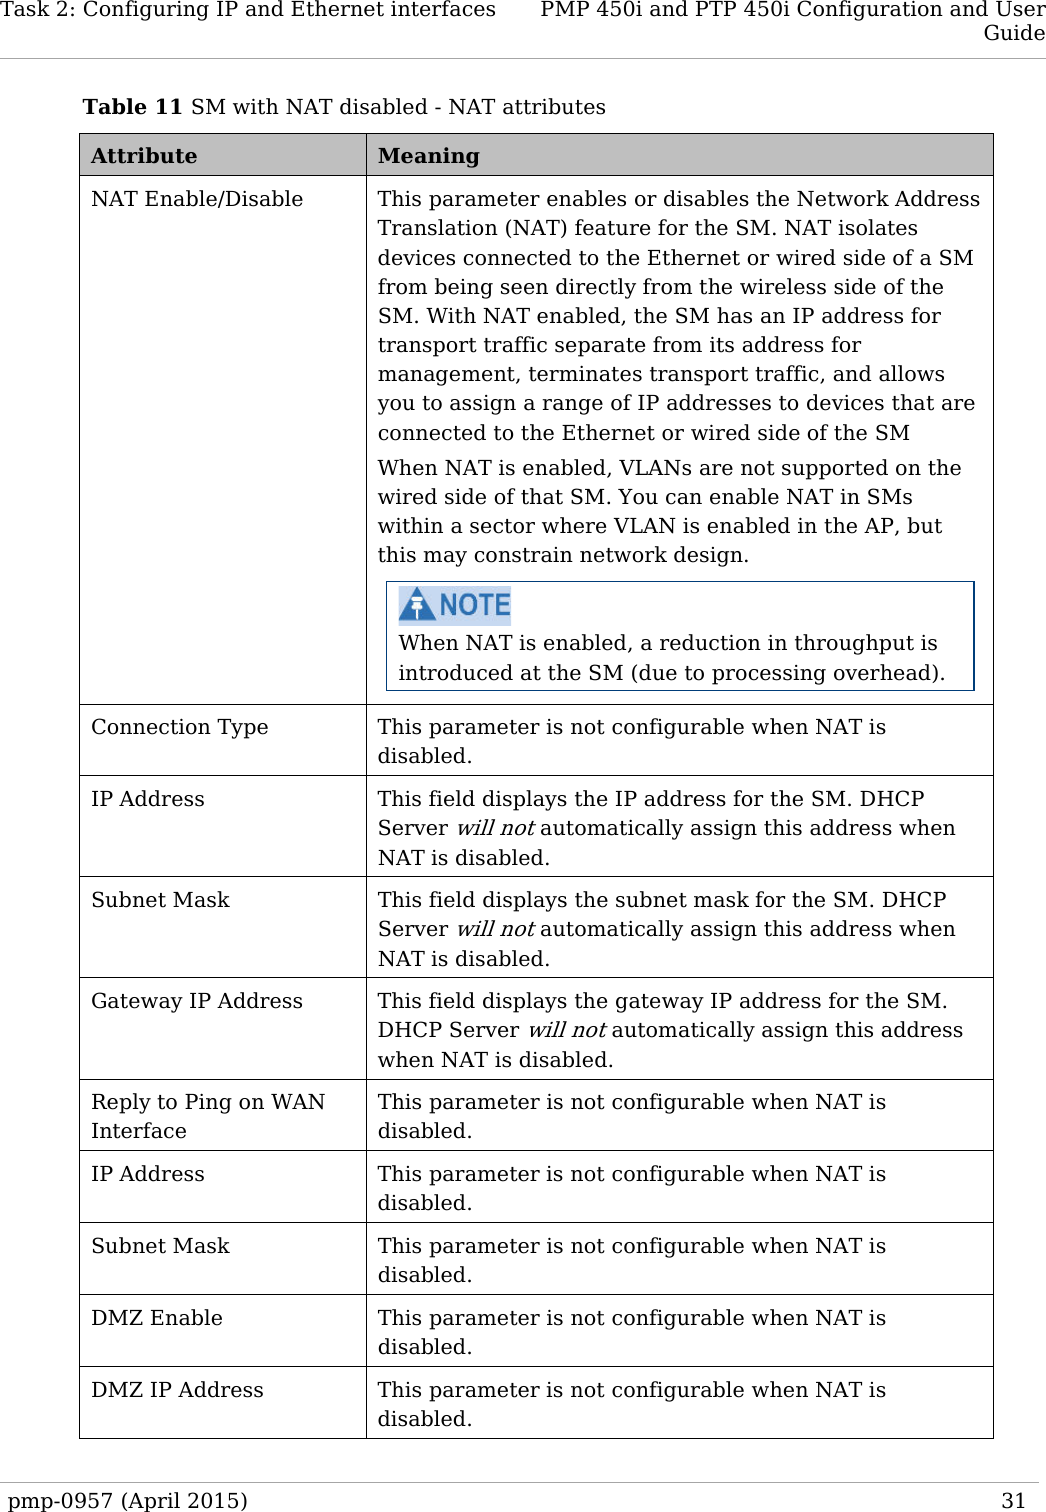 Task 2: Configuring IP and Ethernet interfaces PMP 450i and PTP 450i Configuration and User Guide  Table 11 SM with NAT disabled - NAT attributes Attribute Meaning NAT Enable/Disable This parameter enables or disables the Network Address Translation (NAT) feature for the SM. NAT isolates devices connected to the Ethernet or wired side of a SM from being seen directly from the wireless side of the SM. With NAT enabled, the SM has an IP address for transport traffic separate from its address for management, terminates transport traffic, and allows you to assign a range of IP addresses to devices that are connected to the Ethernet or wired side of the SM When NAT is enabled, VLANs are not supported on the wired side of that SM. You can enable NAT in SMs within a sector where VLAN is enabled in the AP, but this may constrain network design.  When NAT is enabled, a reduction in throughput is introduced at the SM (due to processing overhead). Connection Type This parameter is not configurable when NAT is disabled. IP Address This field displays the IP address for the SM. DHCP Server will not automatically assign this address when NAT is disabled. Subnet Mask This field displays the subnet mask for the SM. DHCP Server will not automatically assign this address when NAT is disabled. Gateway IP Address This field displays the gateway IP address for the SM. DHCP Server will not automatically assign this address when NAT is disabled. Reply to Ping on WAN Interface This parameter is not configurable when NAT is disabled. IP Address This parameter is not configurable when NAT is disabled. Subnet Mask This parameter is not configurable when NAT is disabled. DMZ Enable This parameter is not configurable when NAT is disabled. DMZ IP Address This parameter is not configurable when NAT is disabled. pmp-0957 (April 2015)   31  